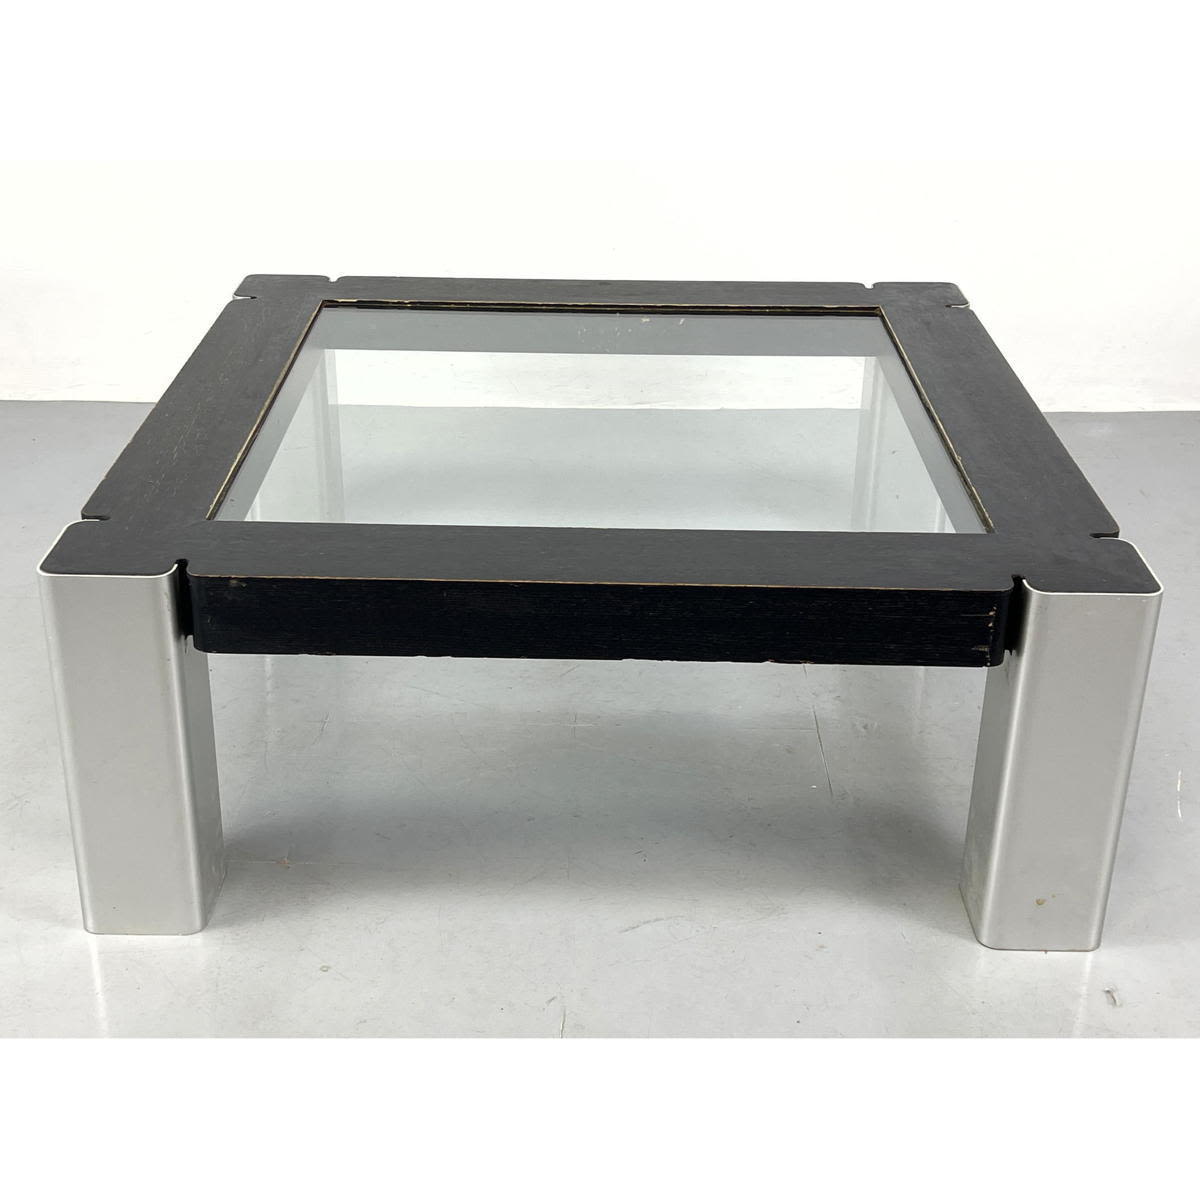 Square Glass coffee table extruded aluminum